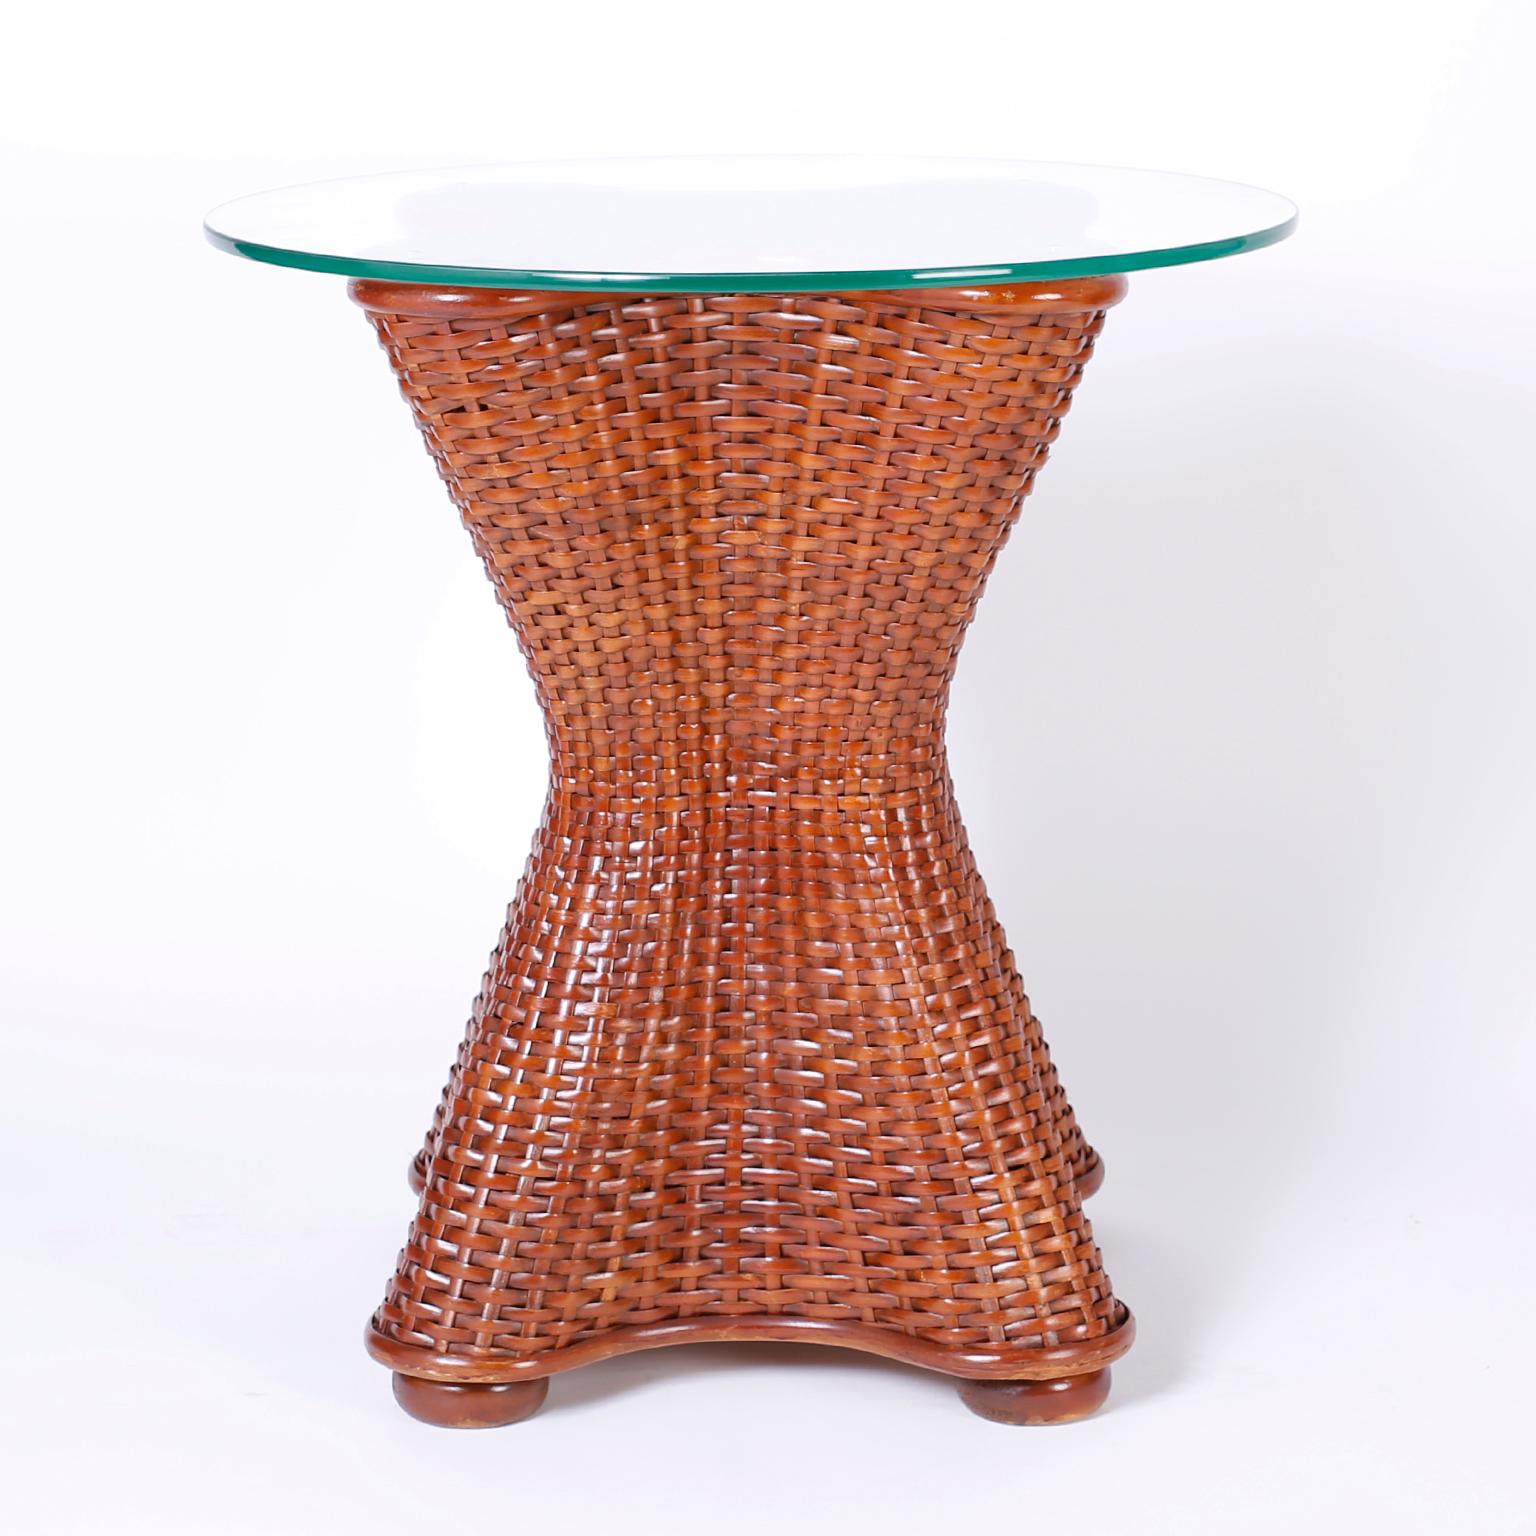 Midcentury wicker and rattan stands with round glass tops and a classic hour glass form on bun feet. Can also be used as a dining table base.